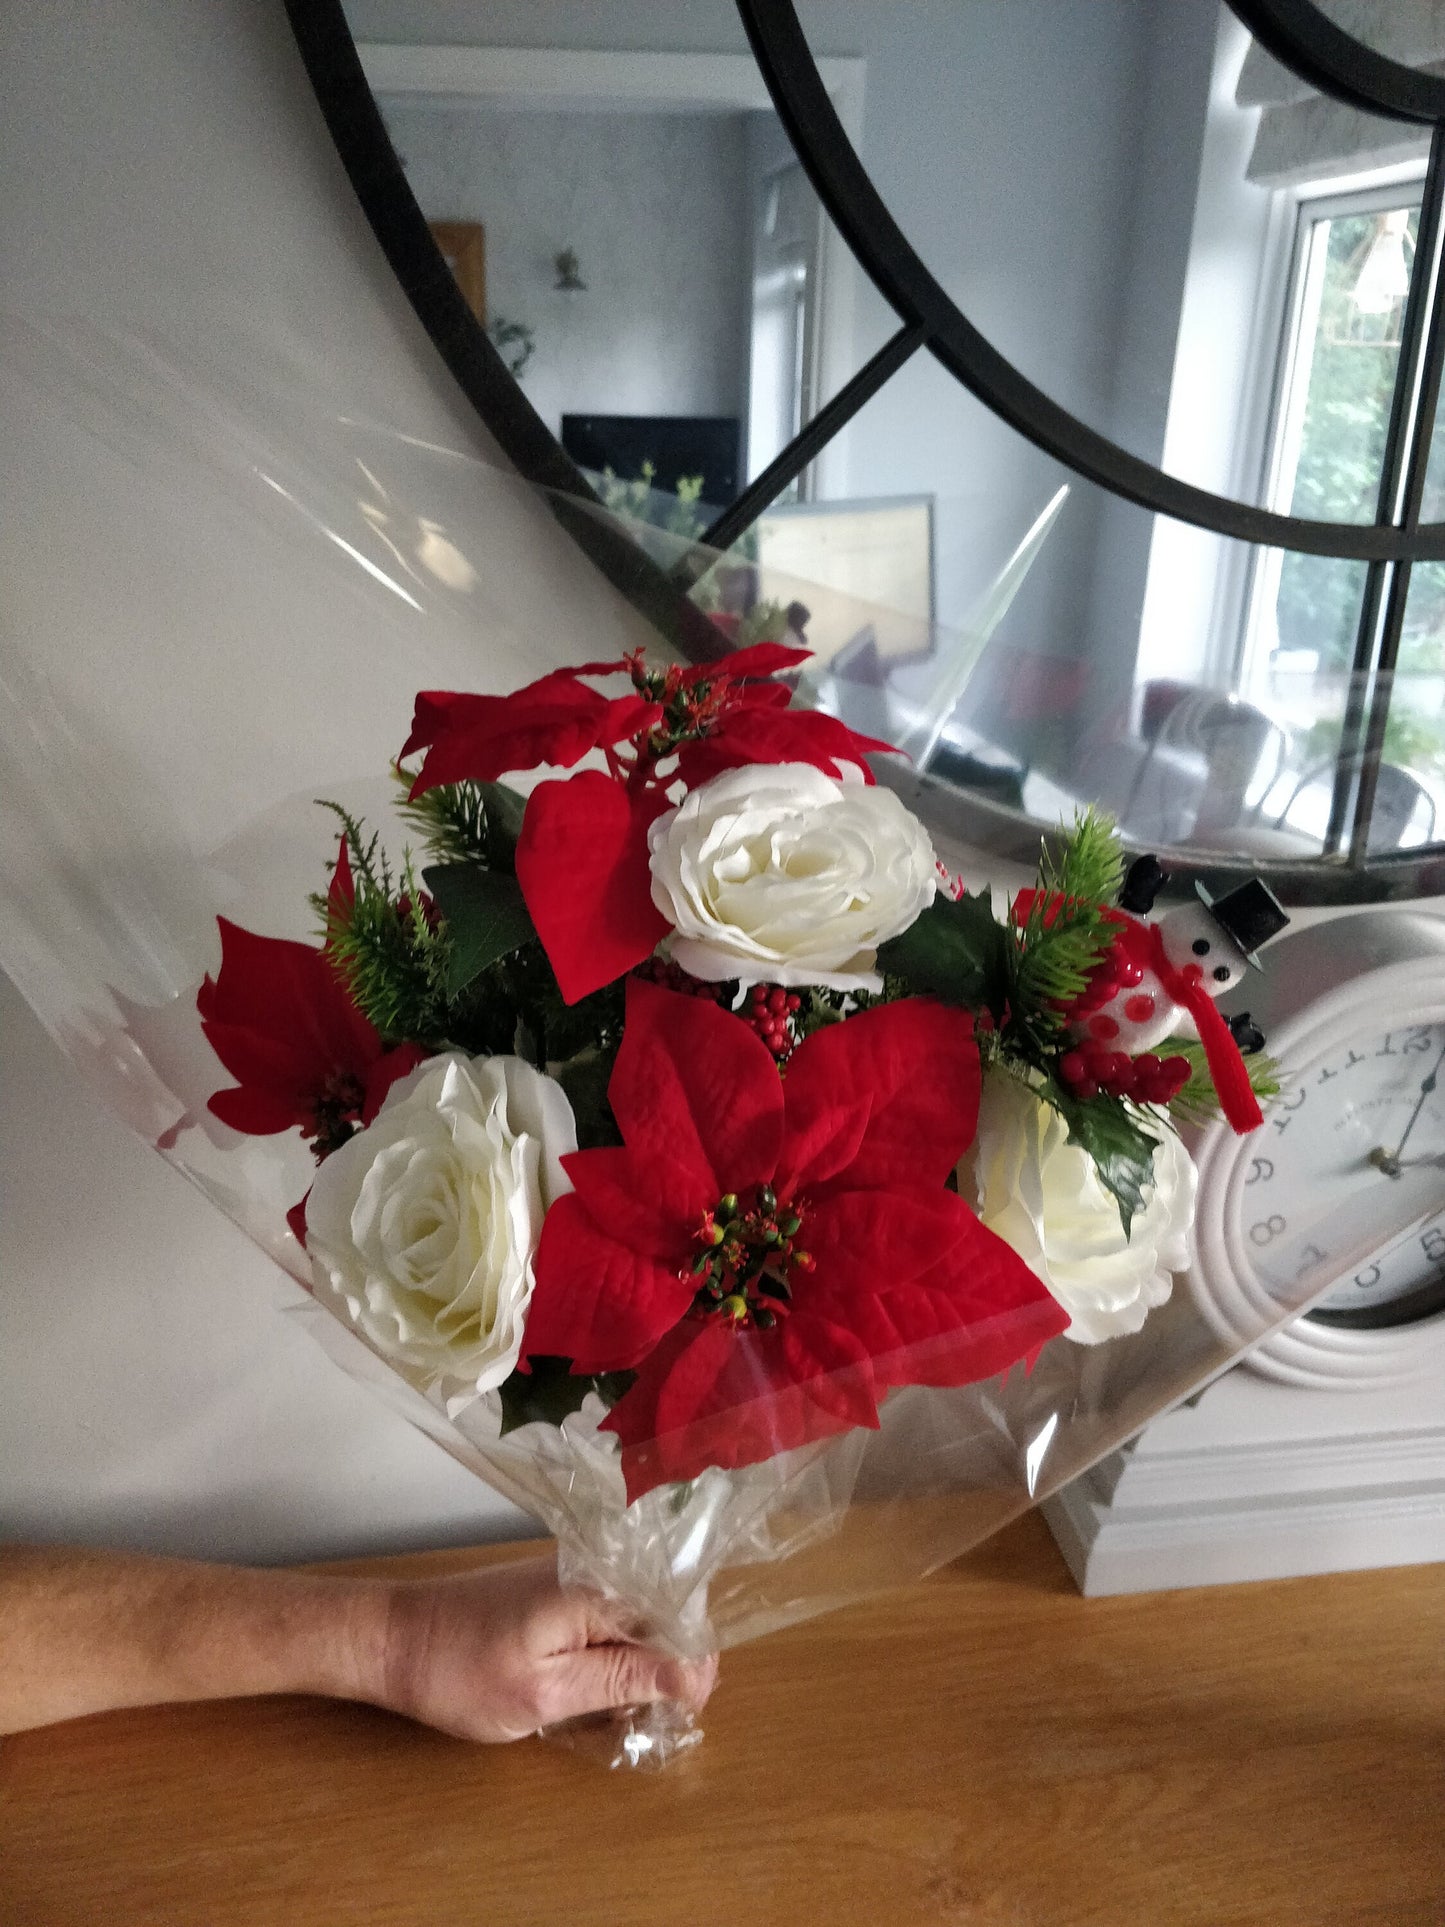 Artificial Flower Christmas Bouquet - Poinsettias, Roses, Holly and Berries